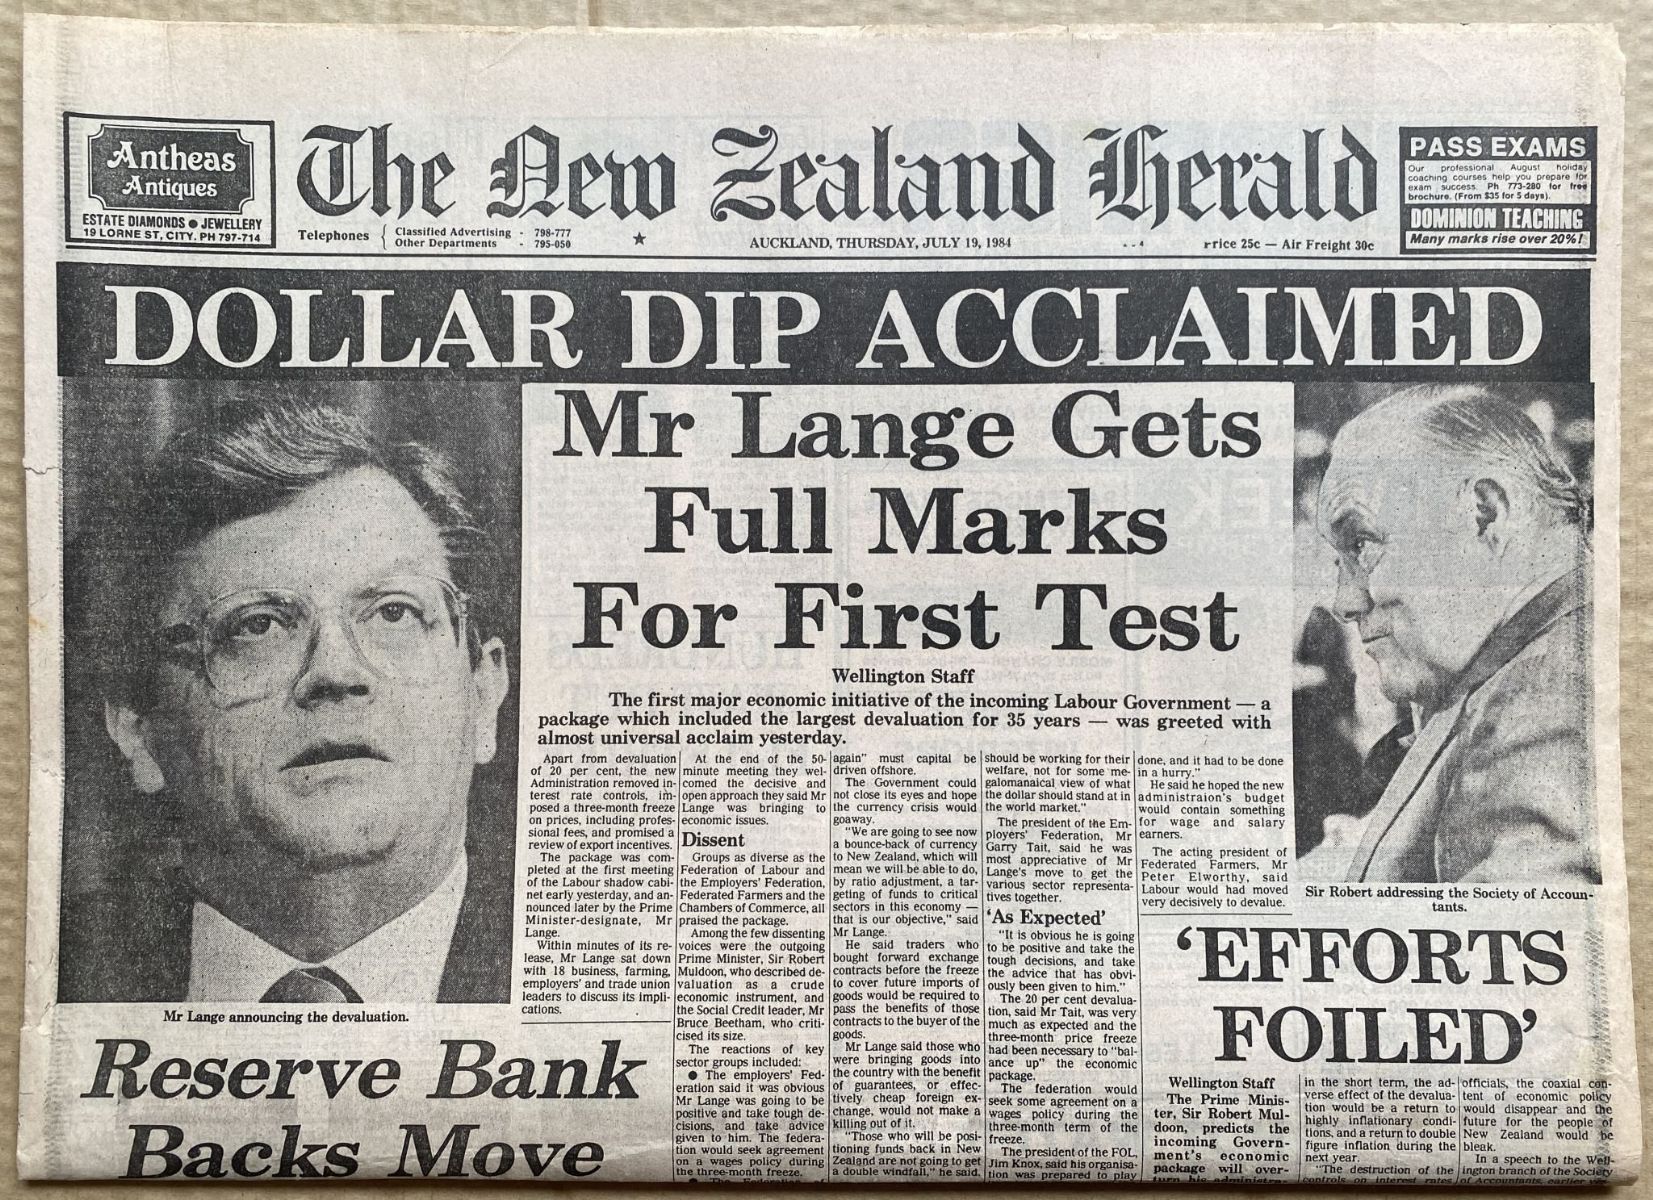 OLD NEWSPAPER: The New Zealand Herald, 19 July 1984 - Currency devaluation